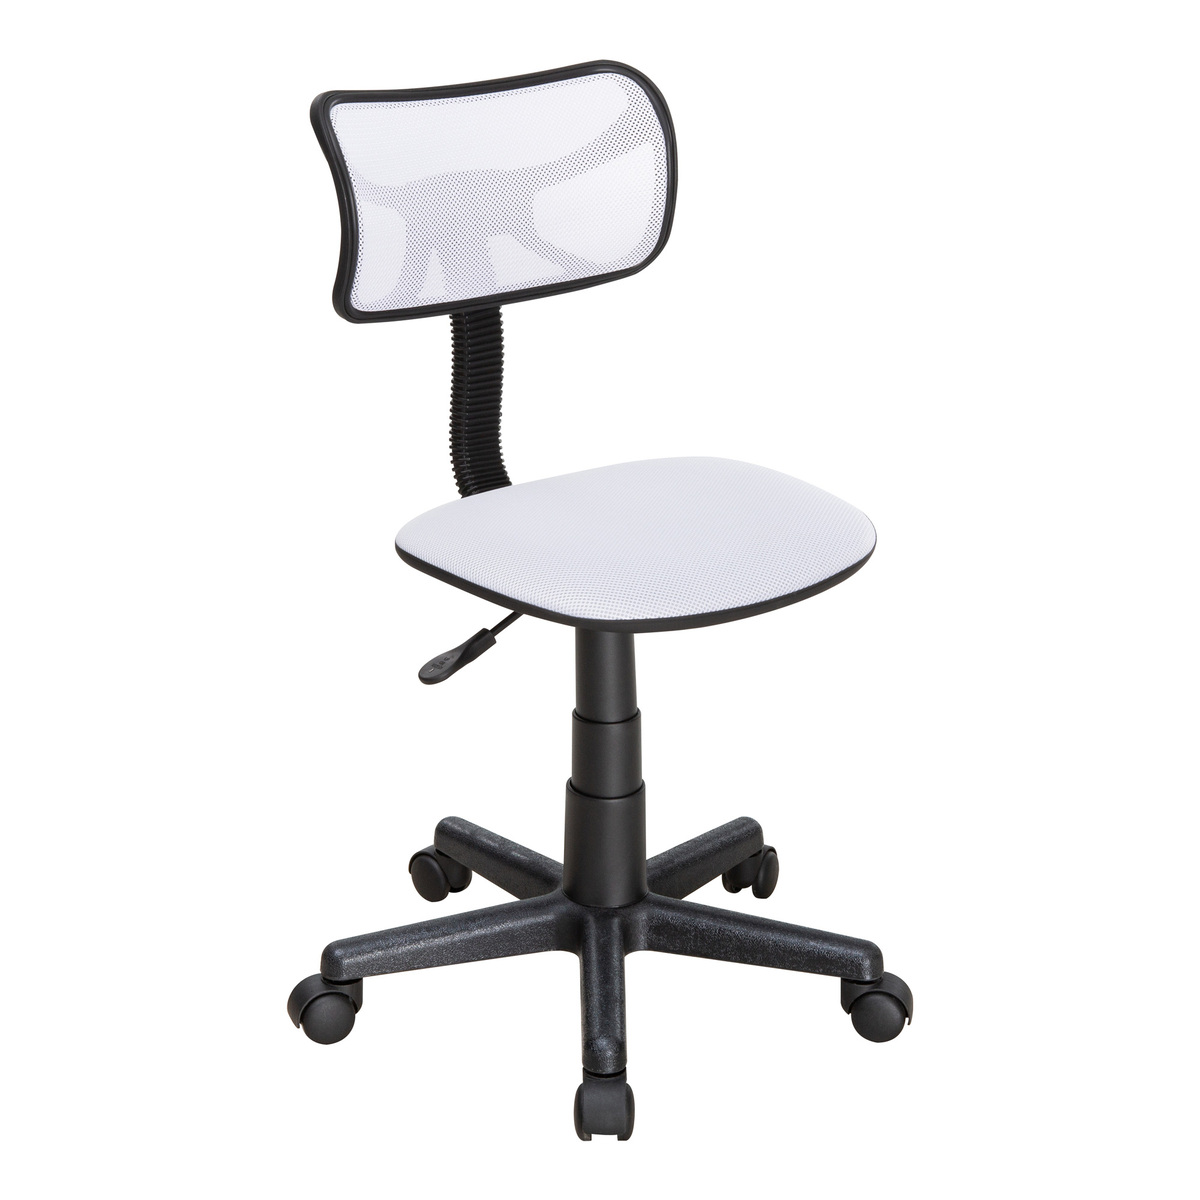 Maple Leaf Adjustable Kids Chair, Office, Computer Chair for Students With Swivel Wheels WK657590